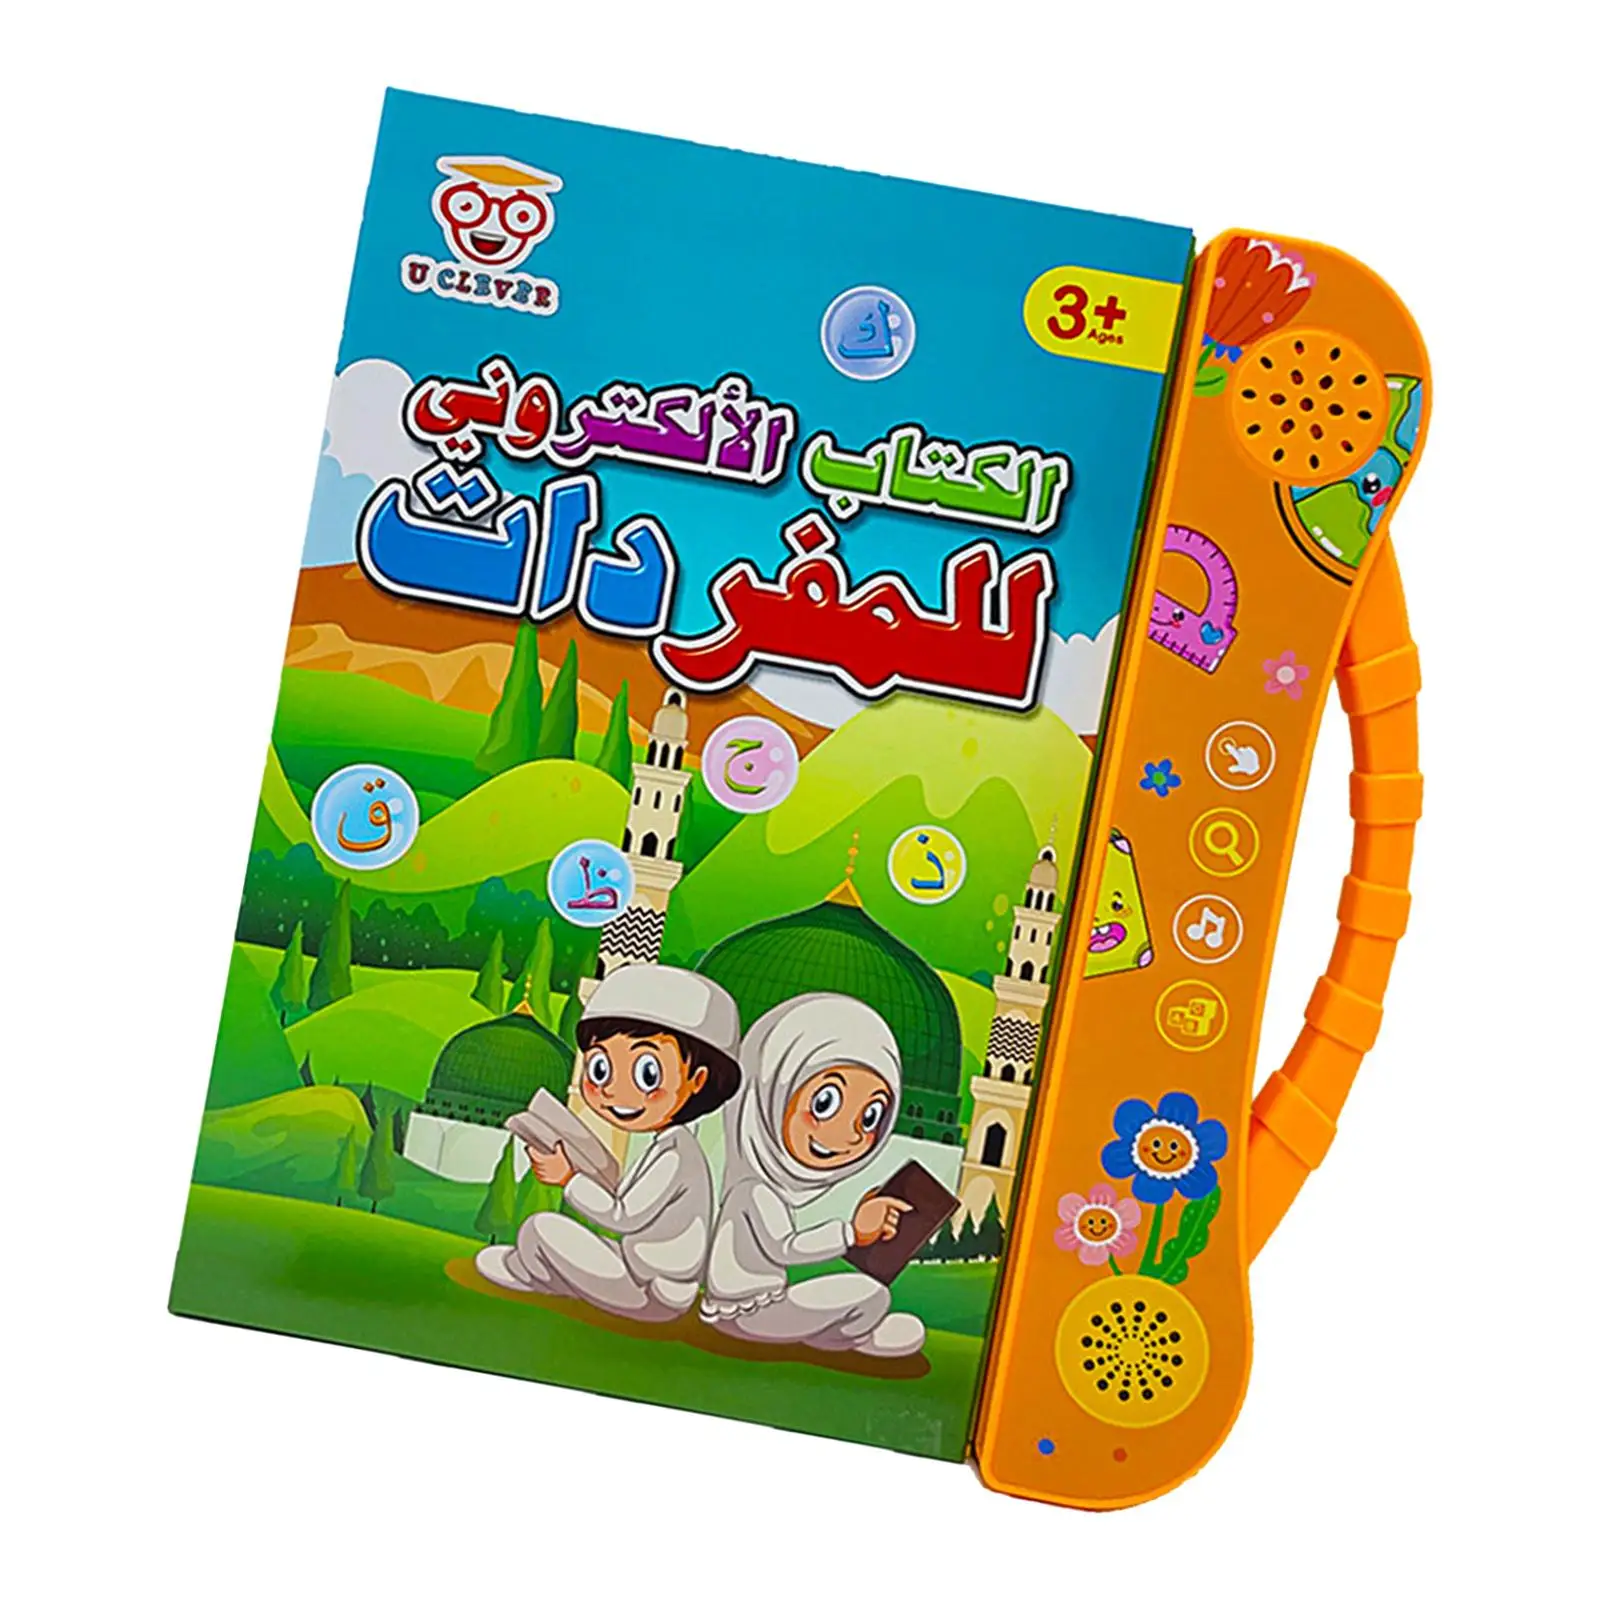 Children Arabic Learning Machine Arabic Language Learning Toys Teaching Toy Cognitive Ability Arabic Reading Machine for Kids